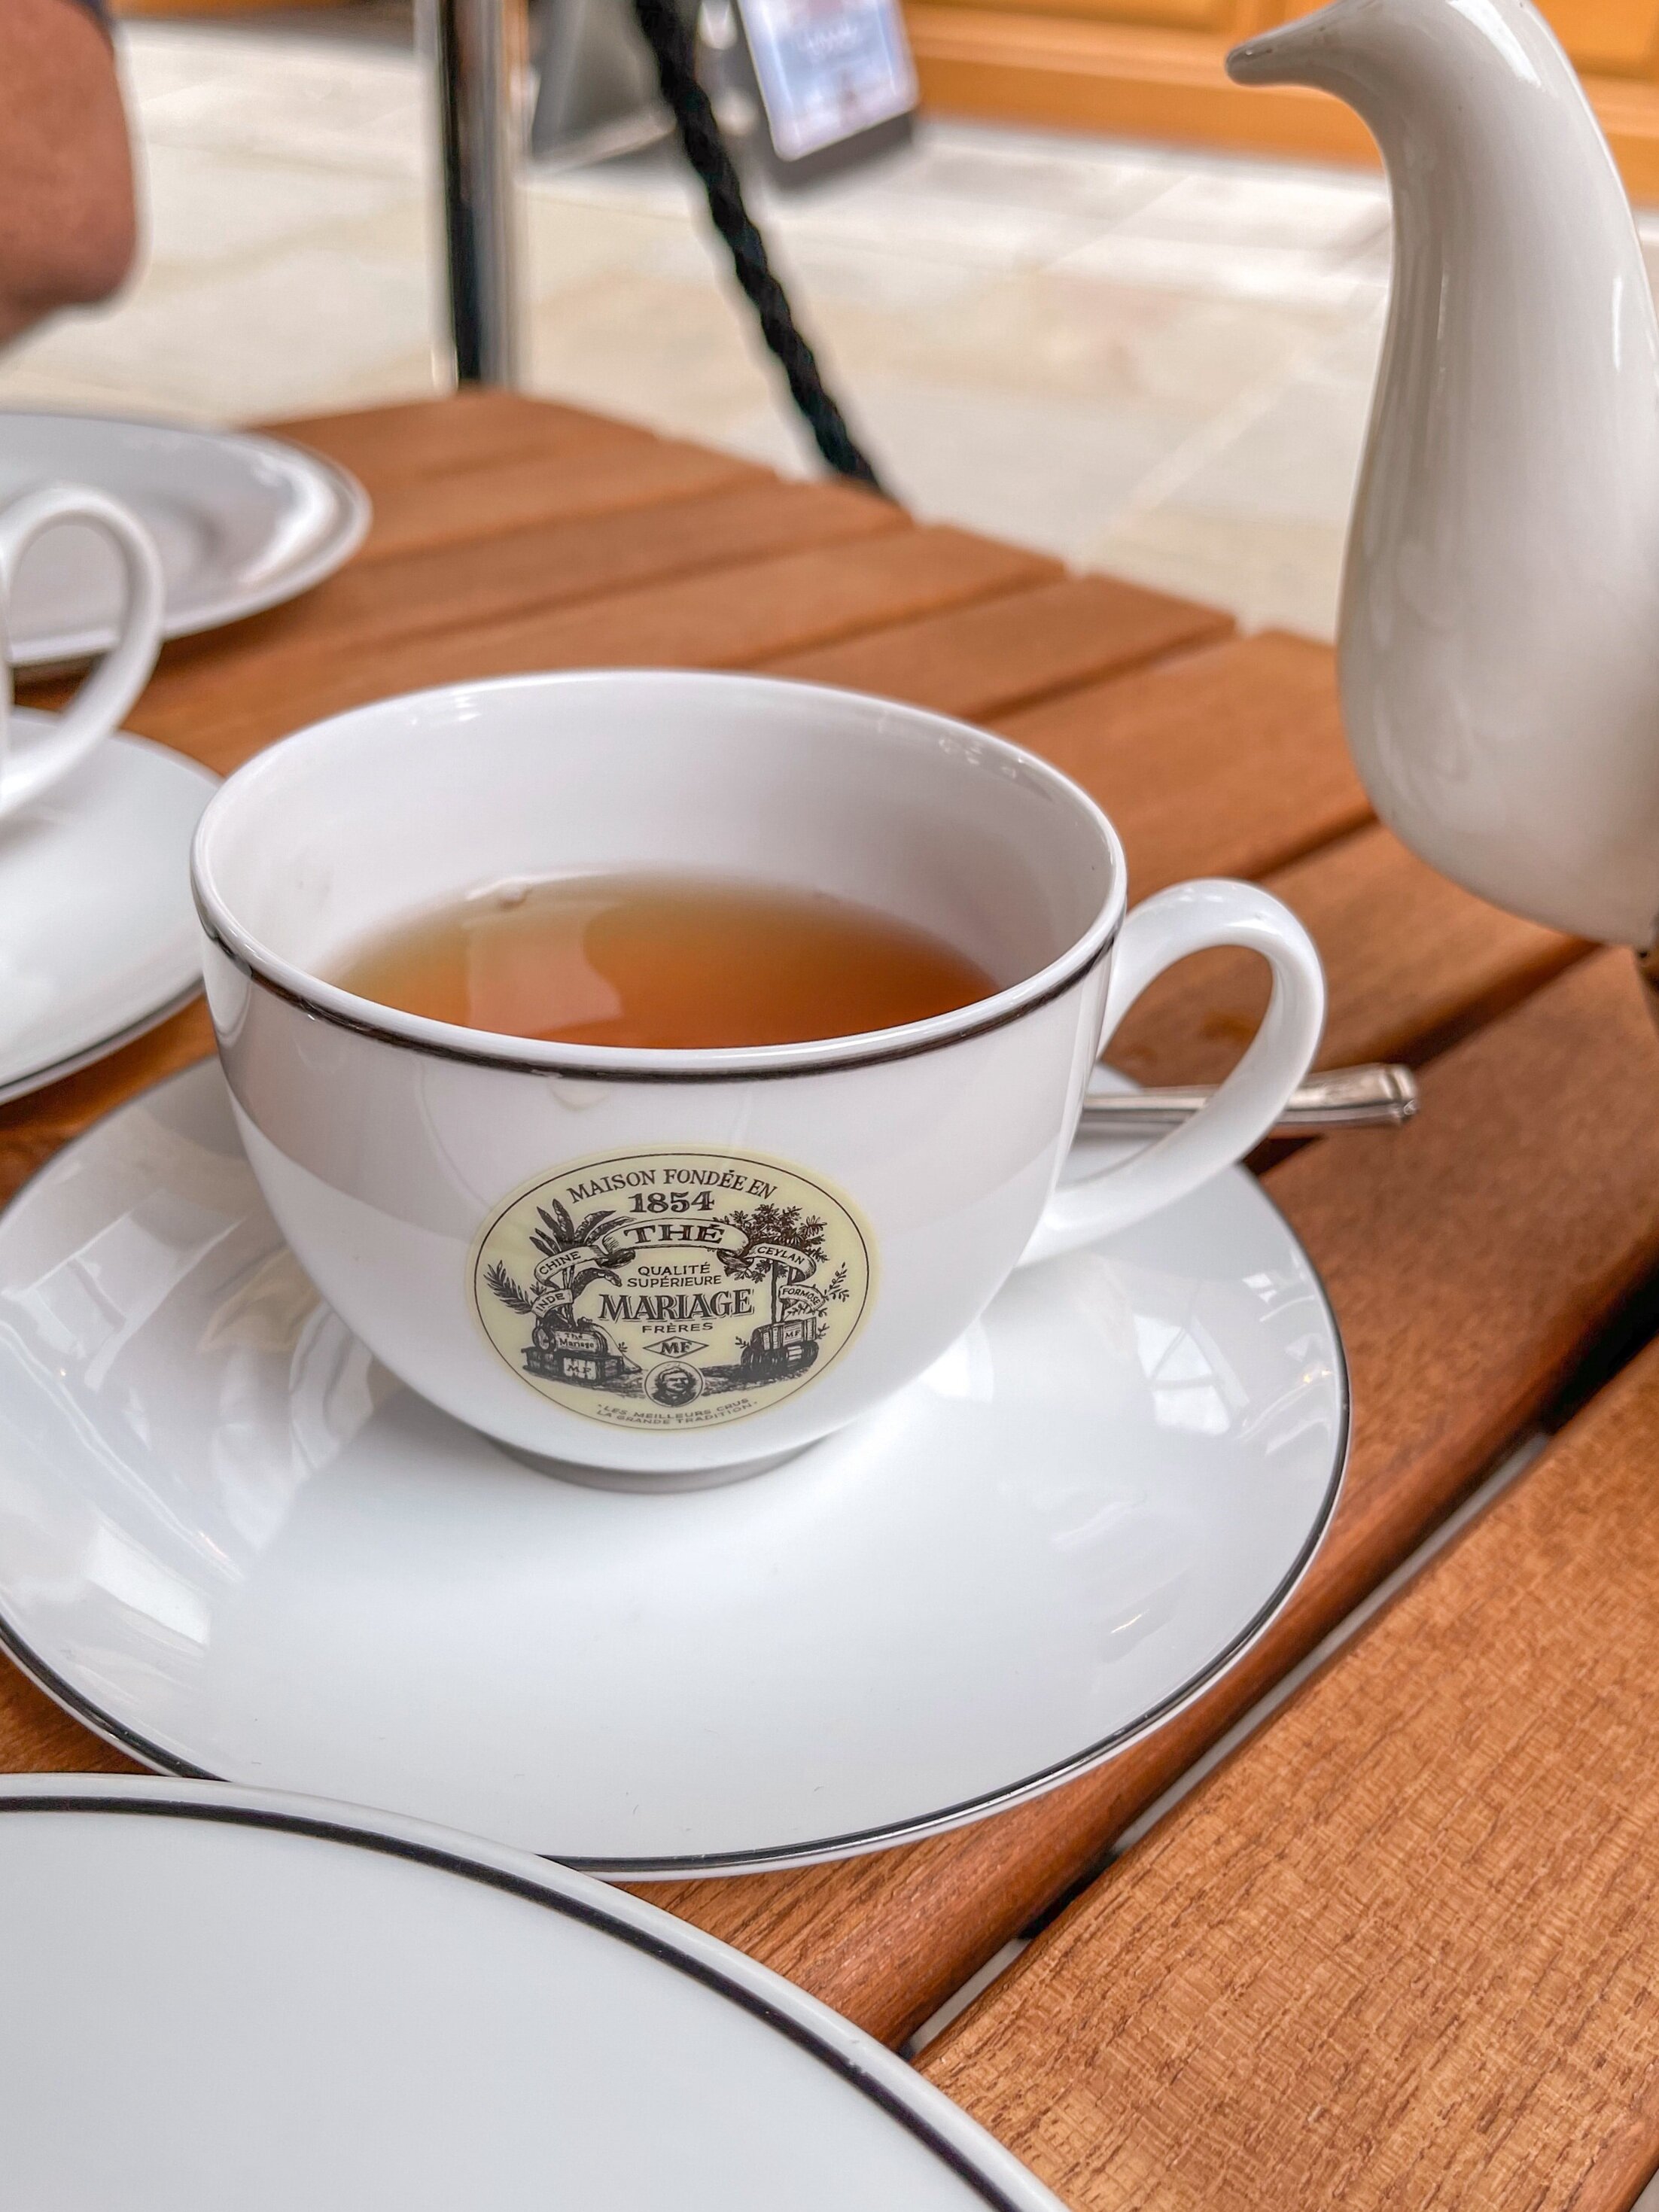 New in London: Mariage Frères Elegant Tea Room and Museum is Now